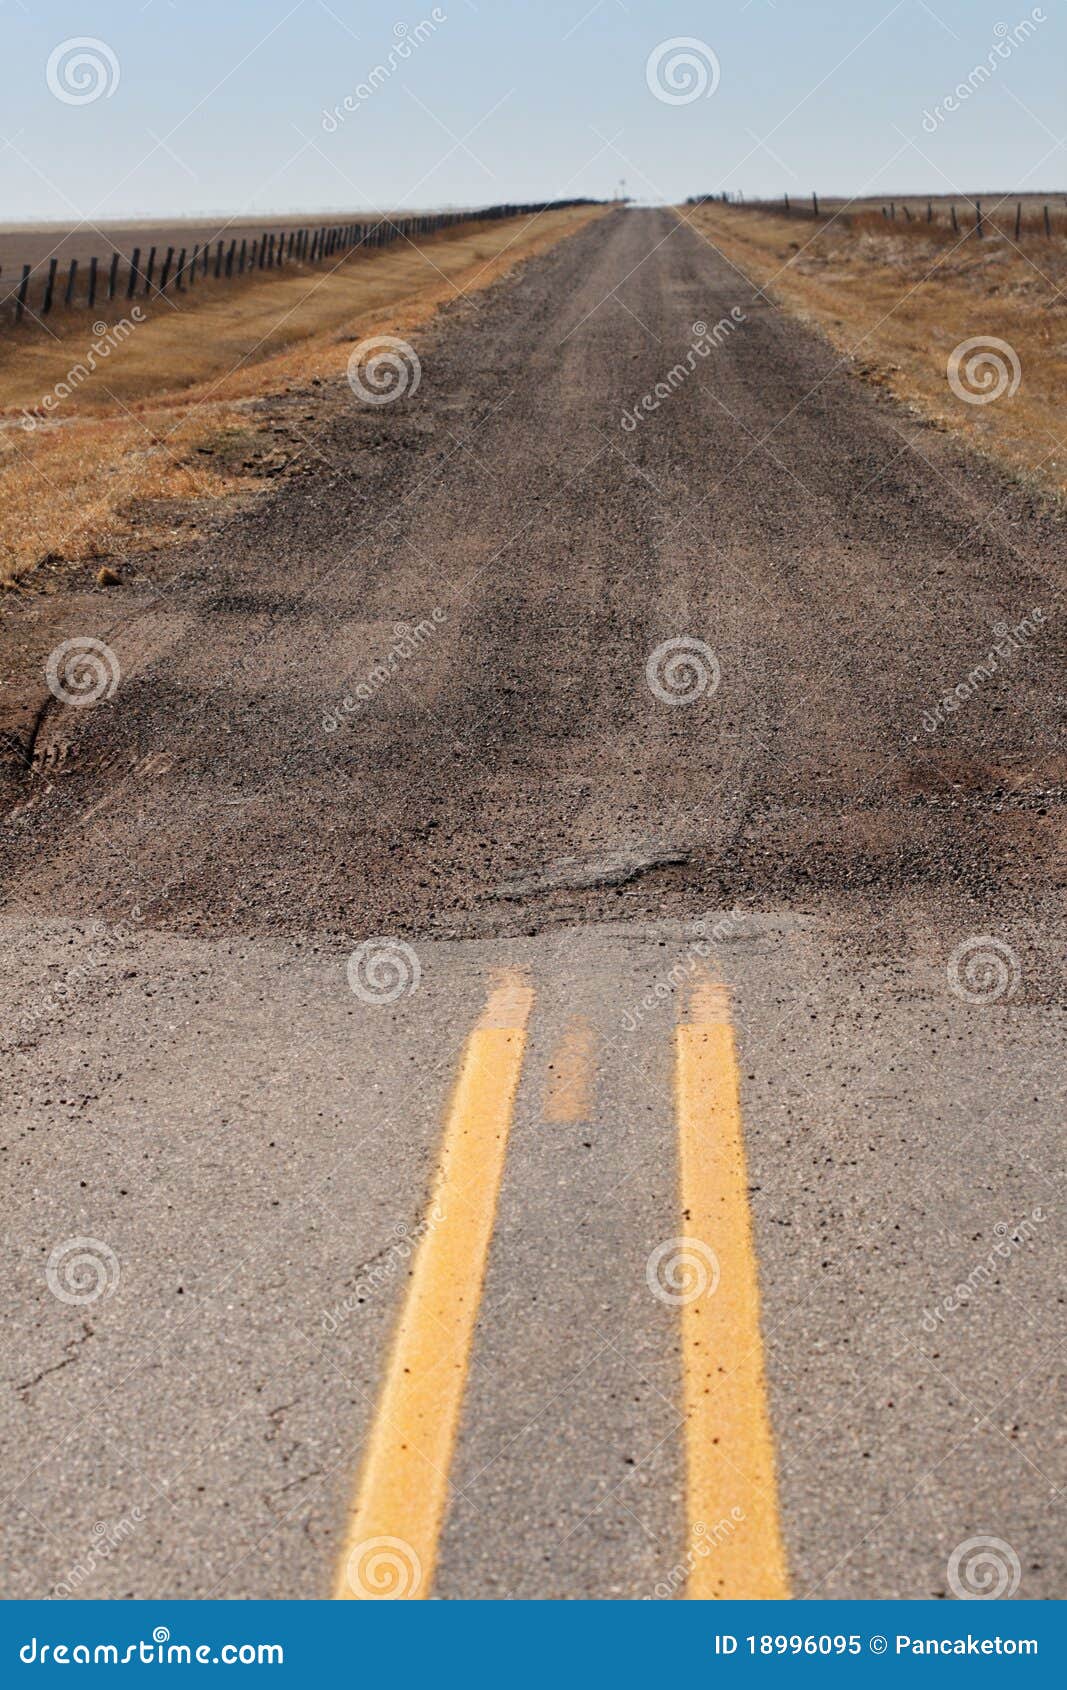 end of paved road